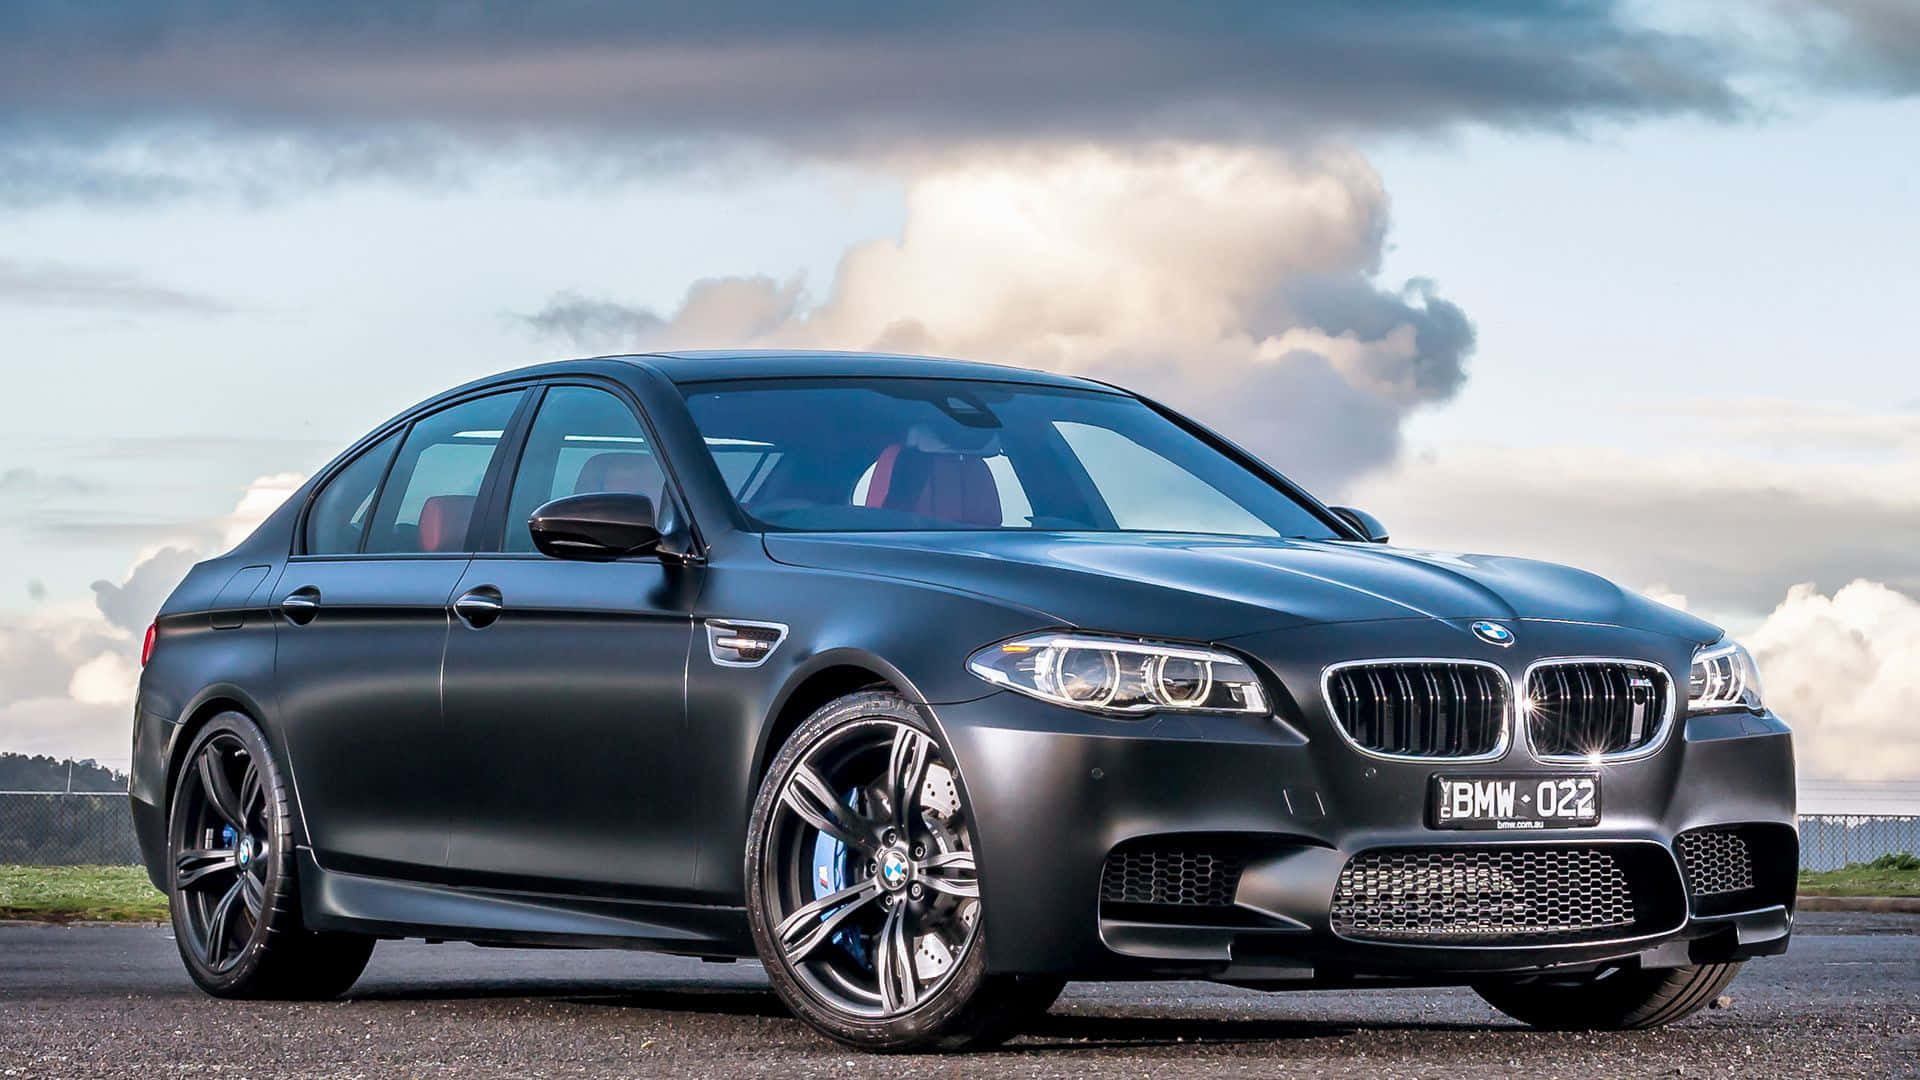 A sleek and powerful BMW M5 in action Wallpaper